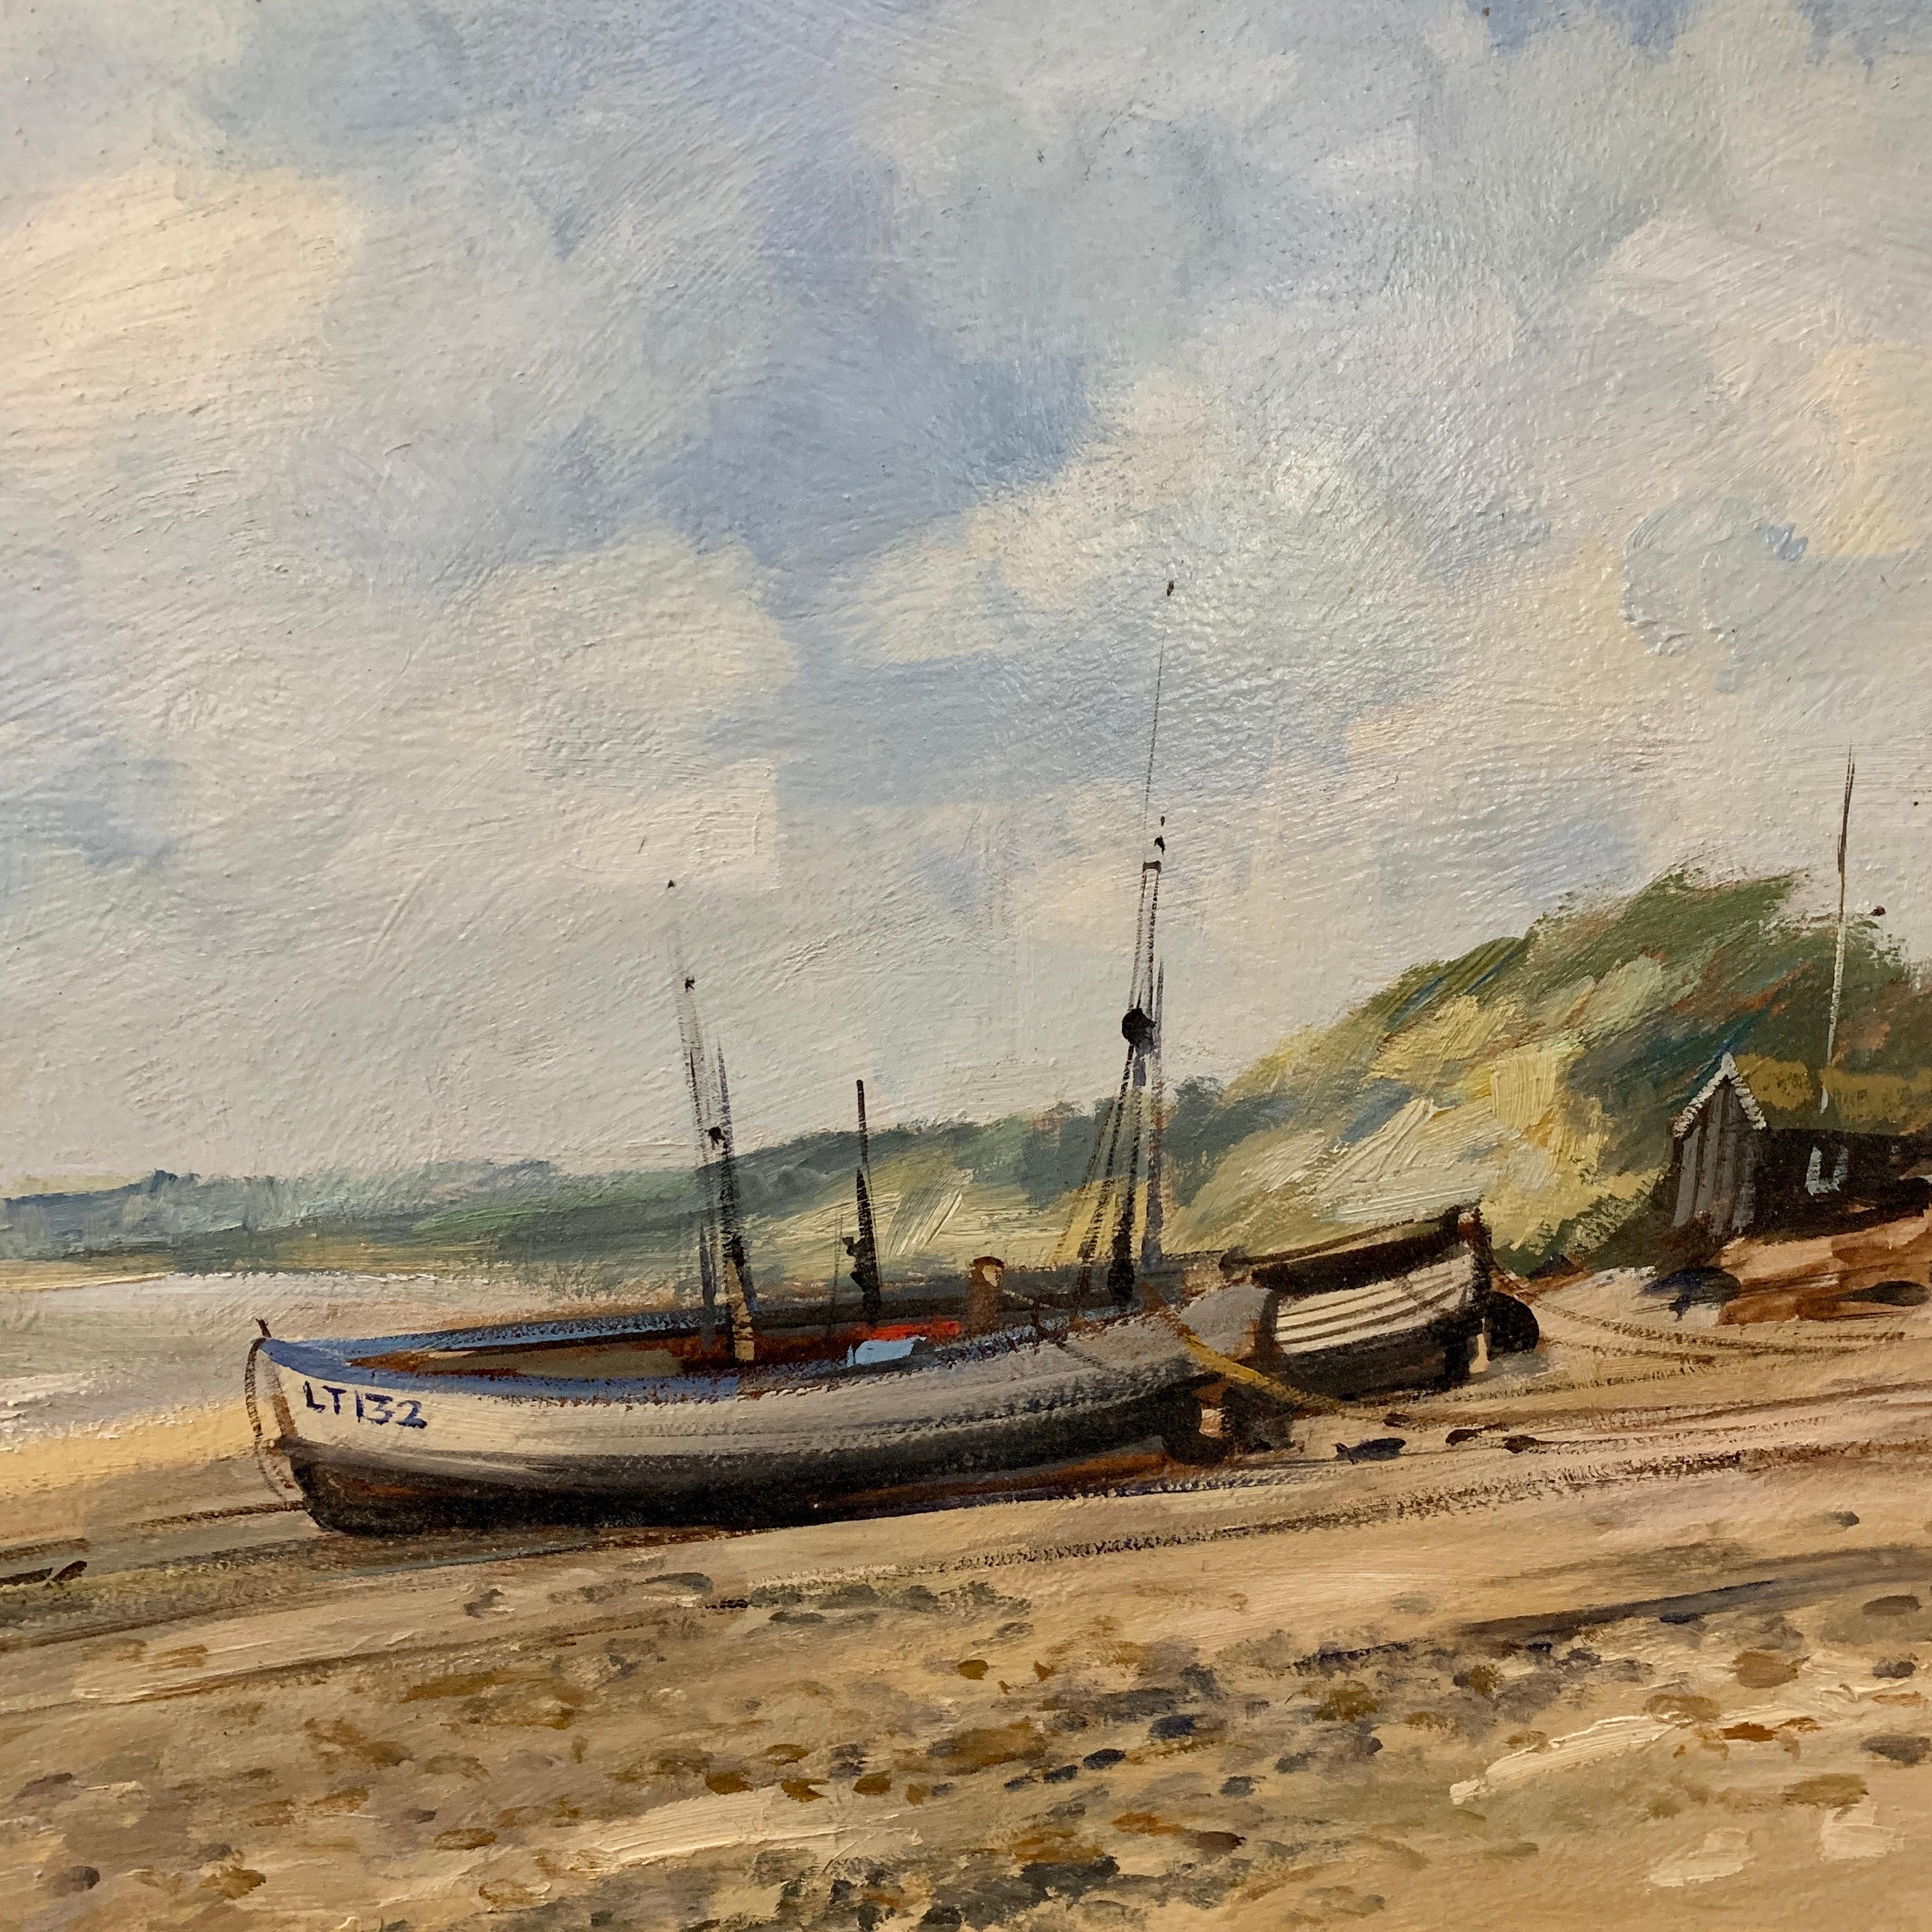 English Impressionist beach, shore scene with fishing boats, huts and landscape  - Gray Landscape Painting by Ivan Taylor